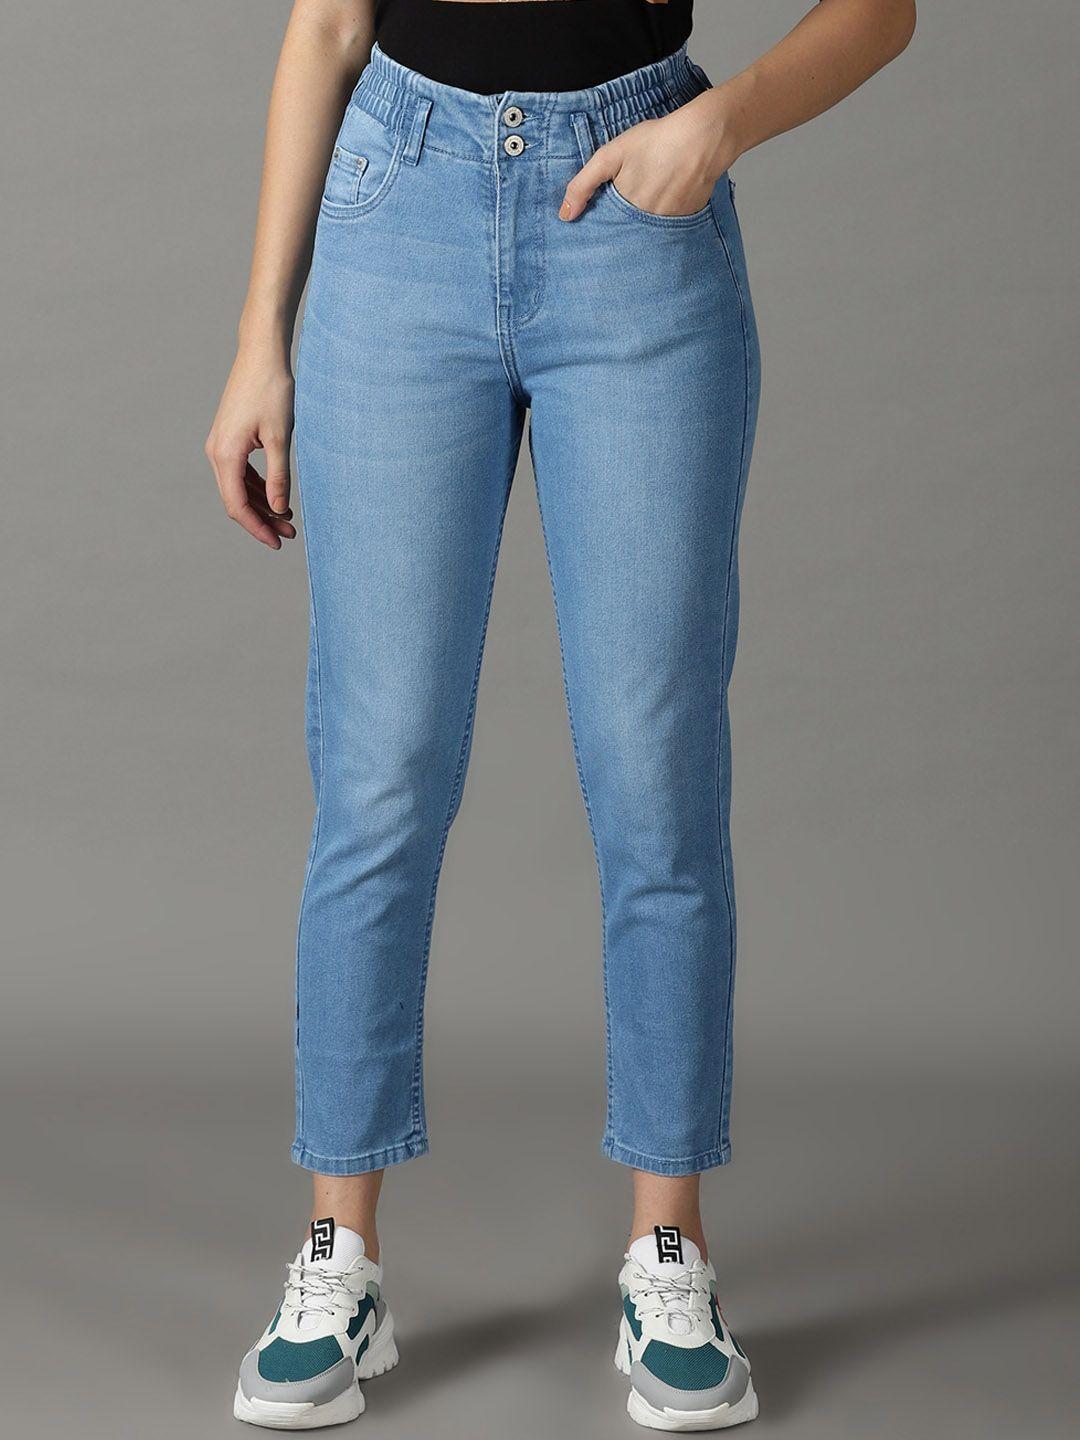 showoff-women-boyfriend-fit-high-rise-light-fade-stretchable-jeans